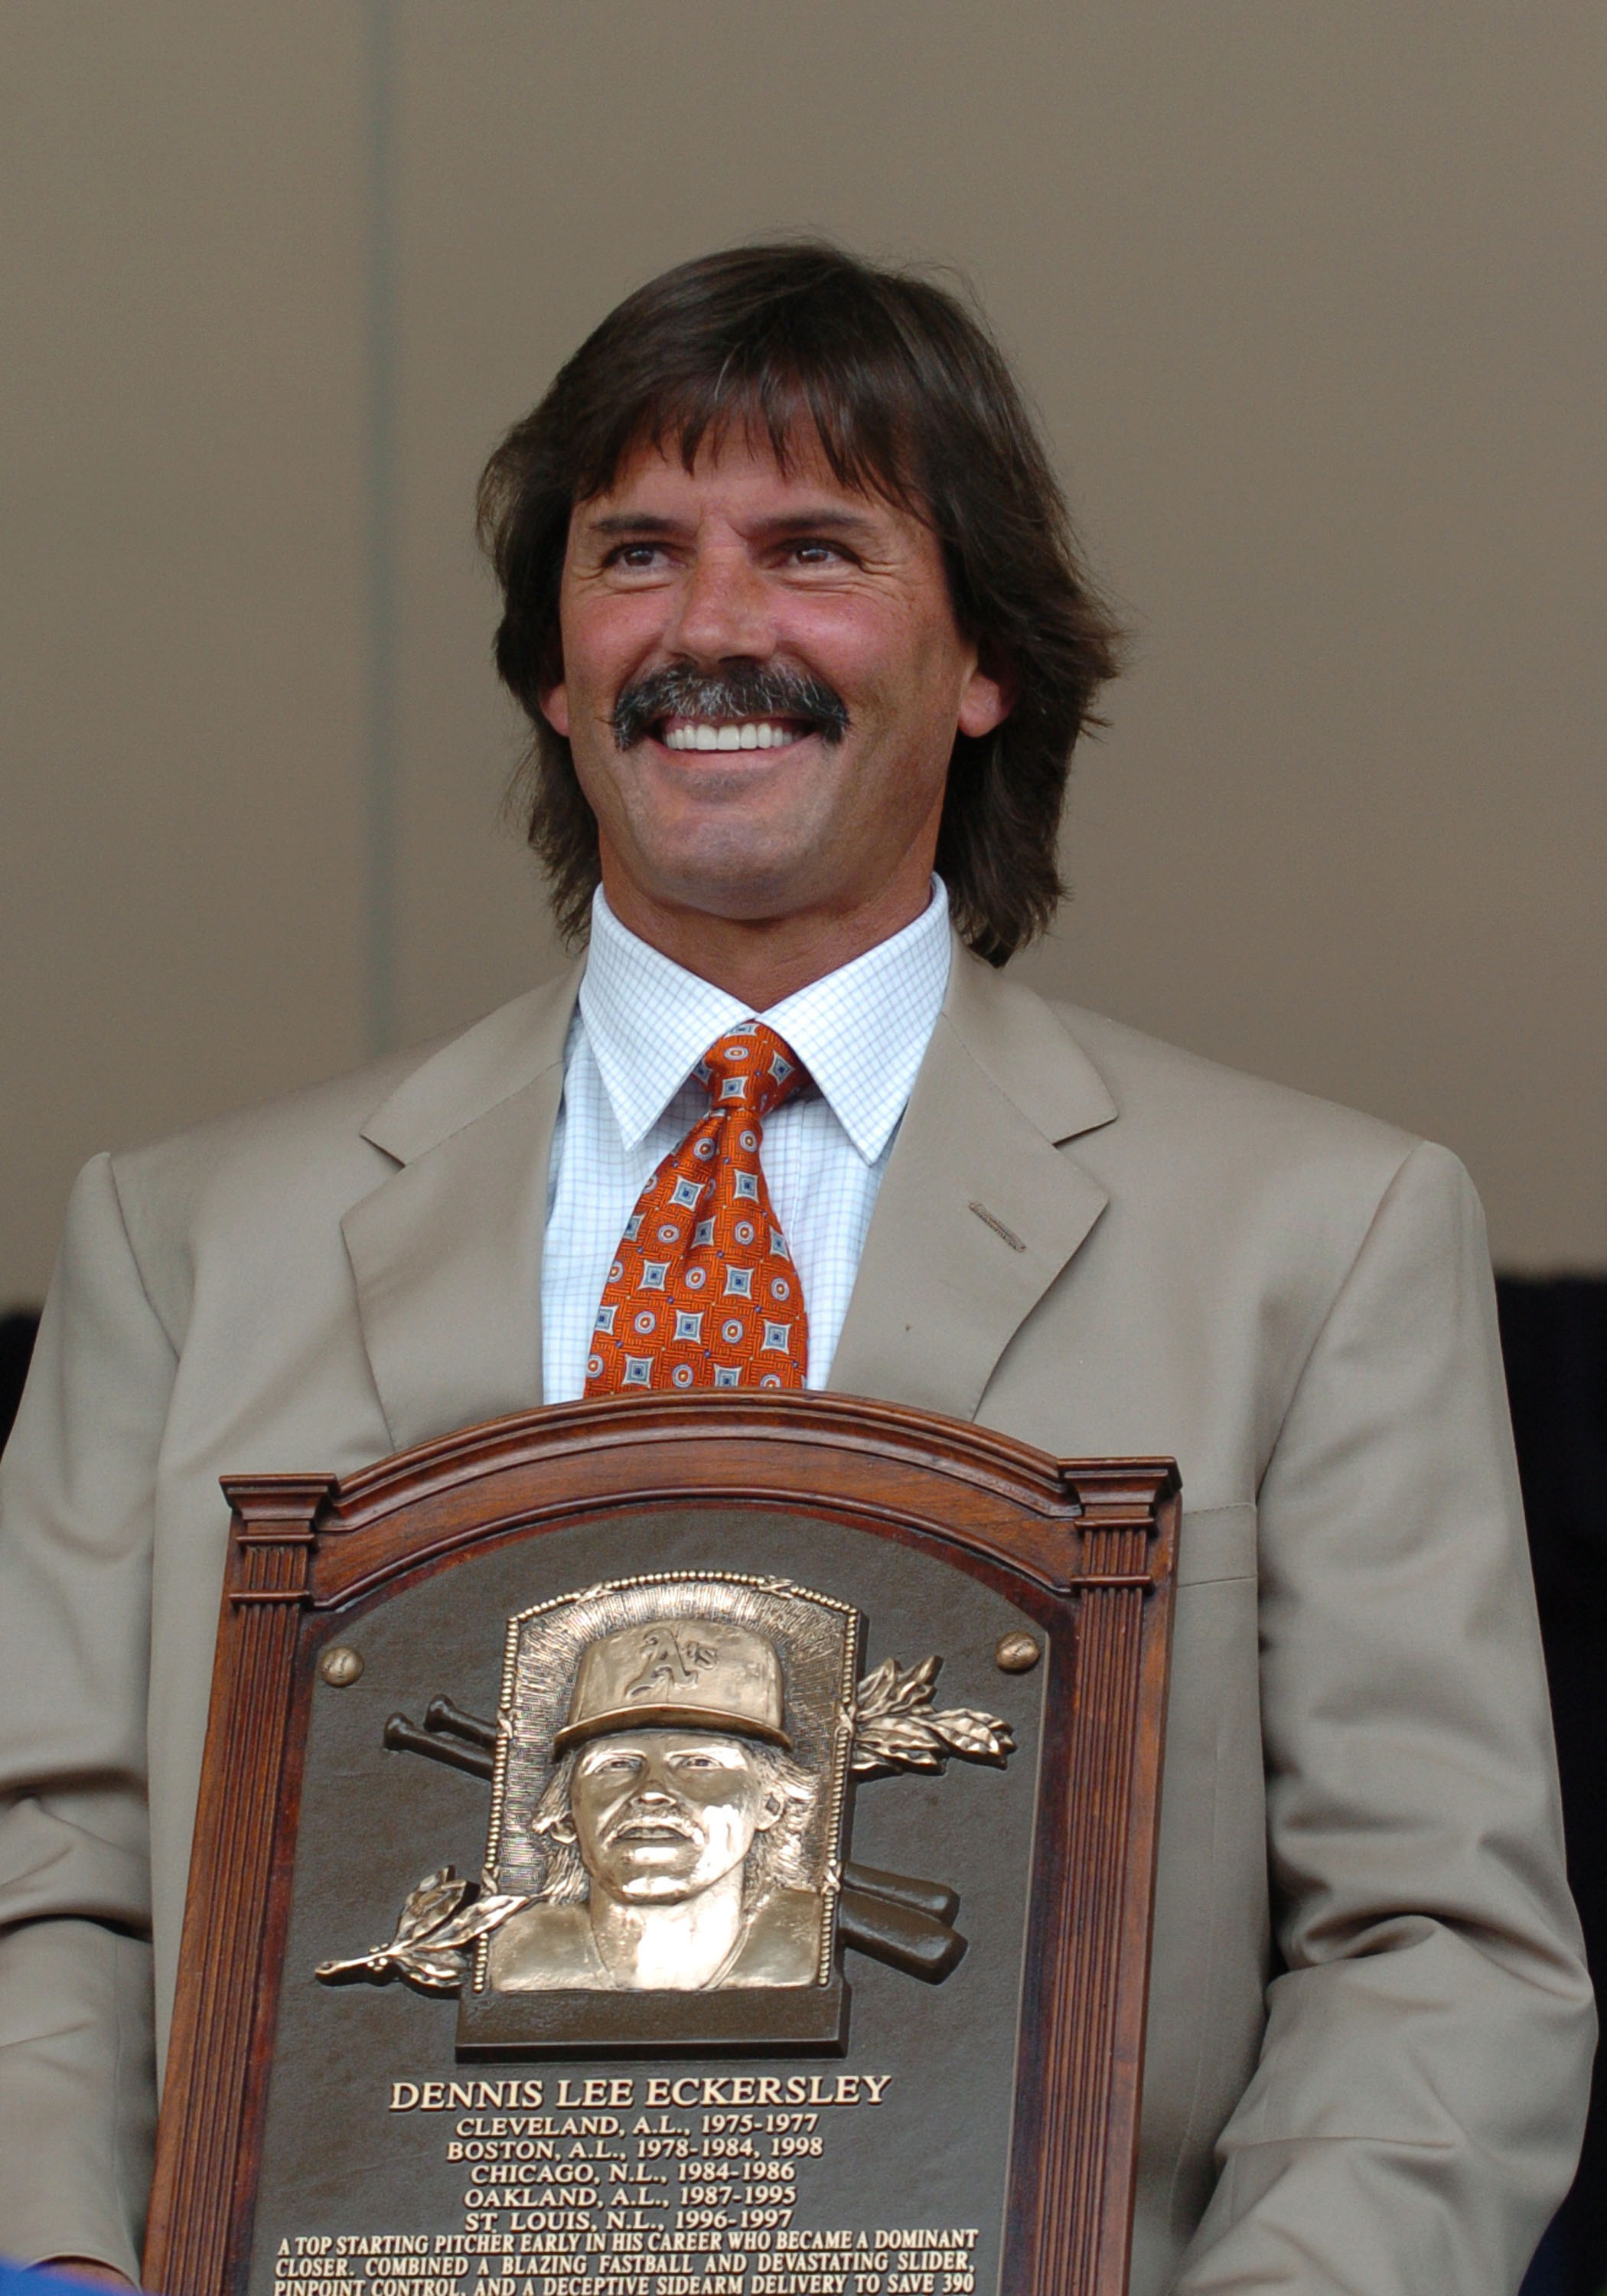 Dennis Eckersley poses with his Hall of Fame plaque.